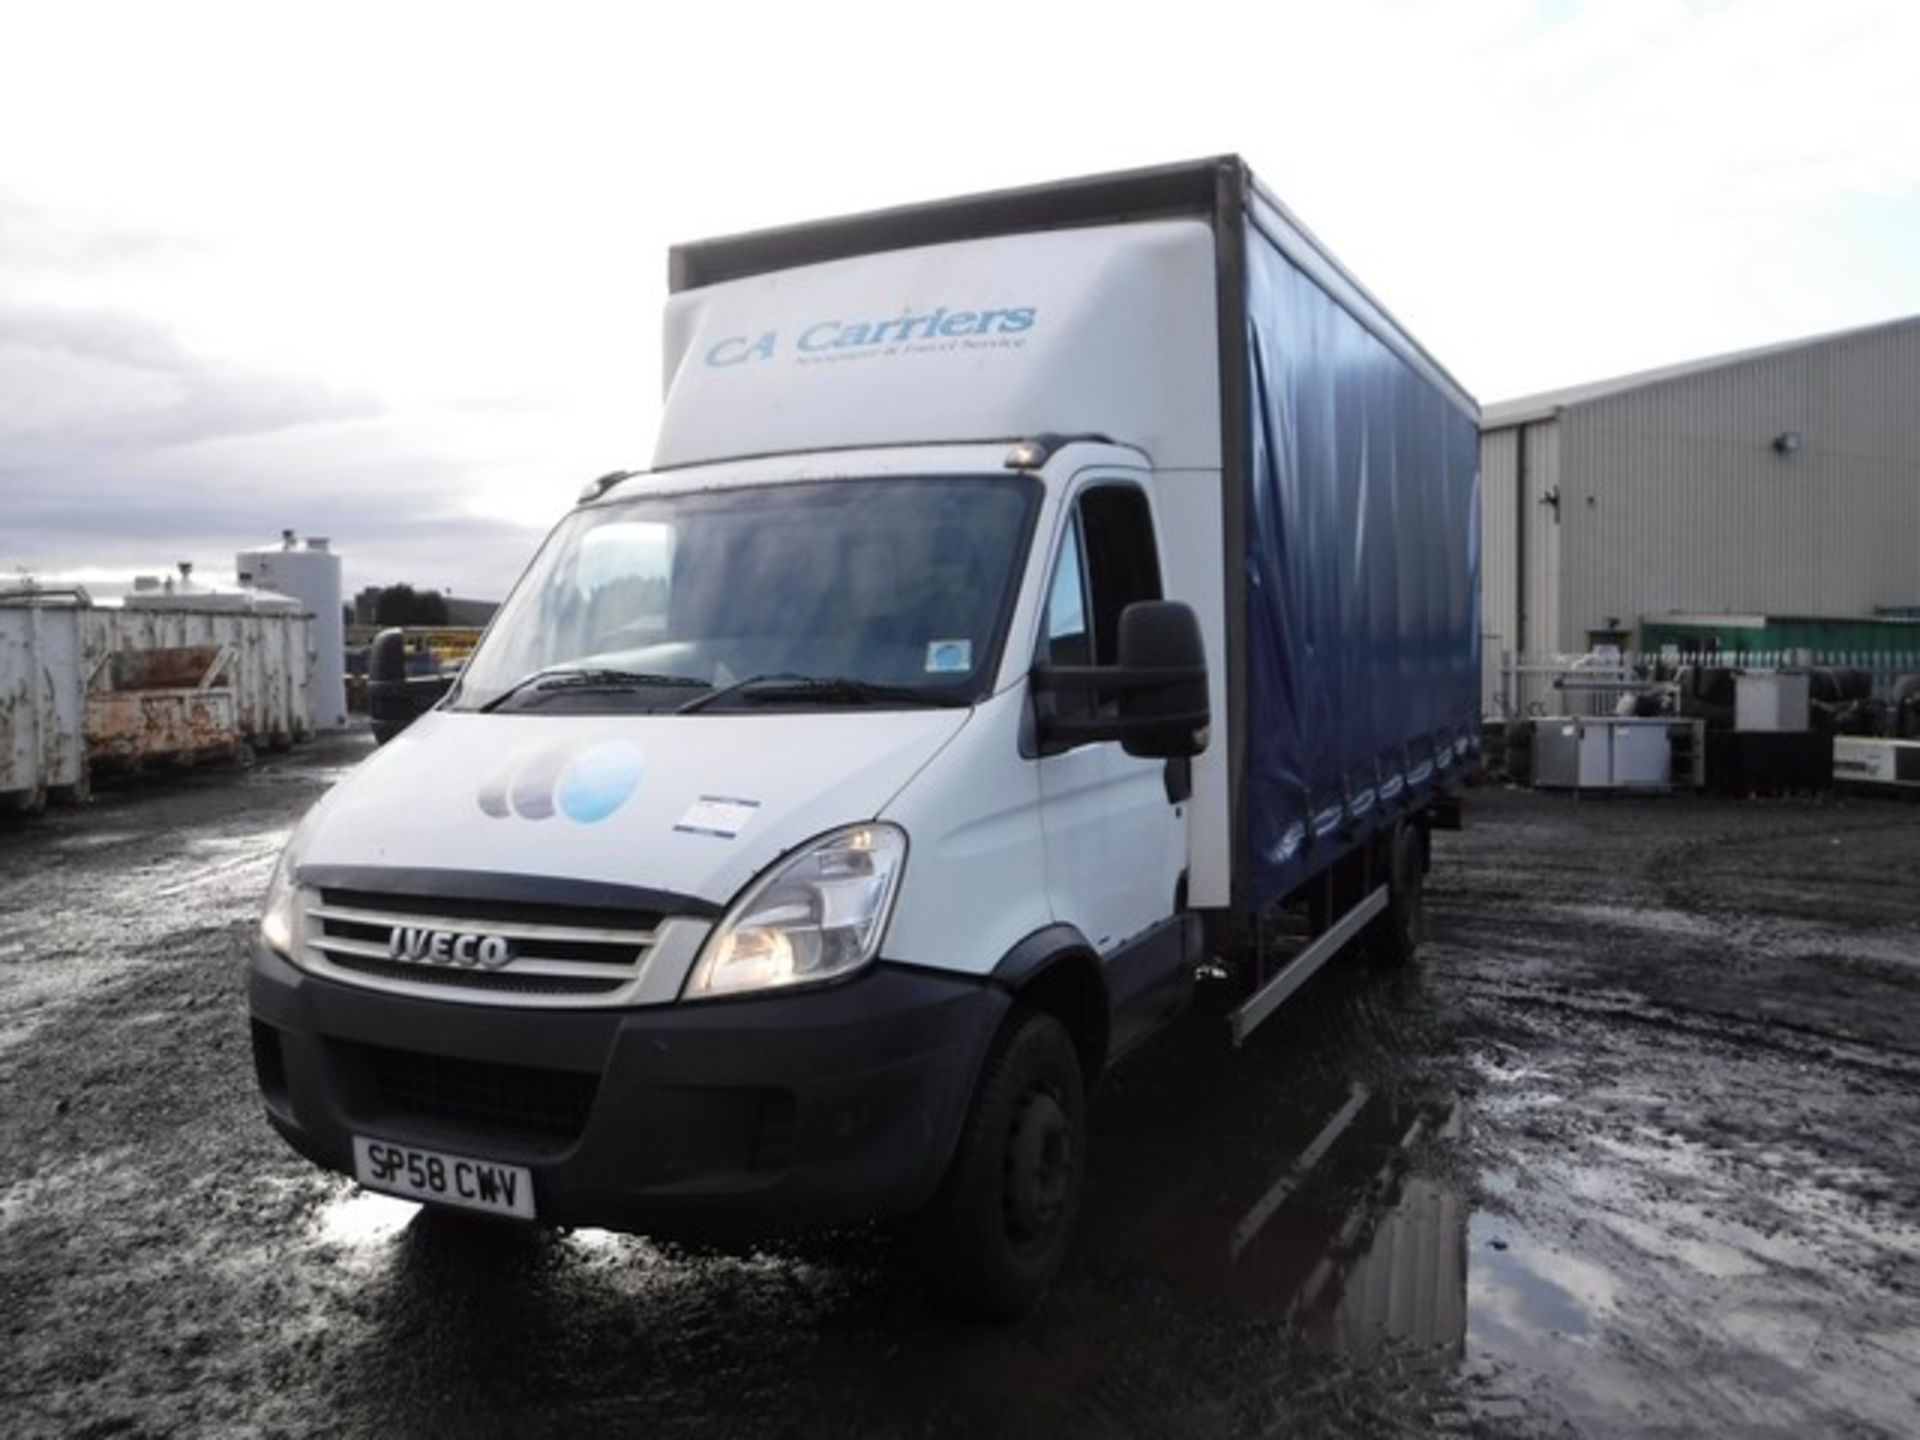 IVECO DAILY 65C18 - 2998cc - Image 6 of 6